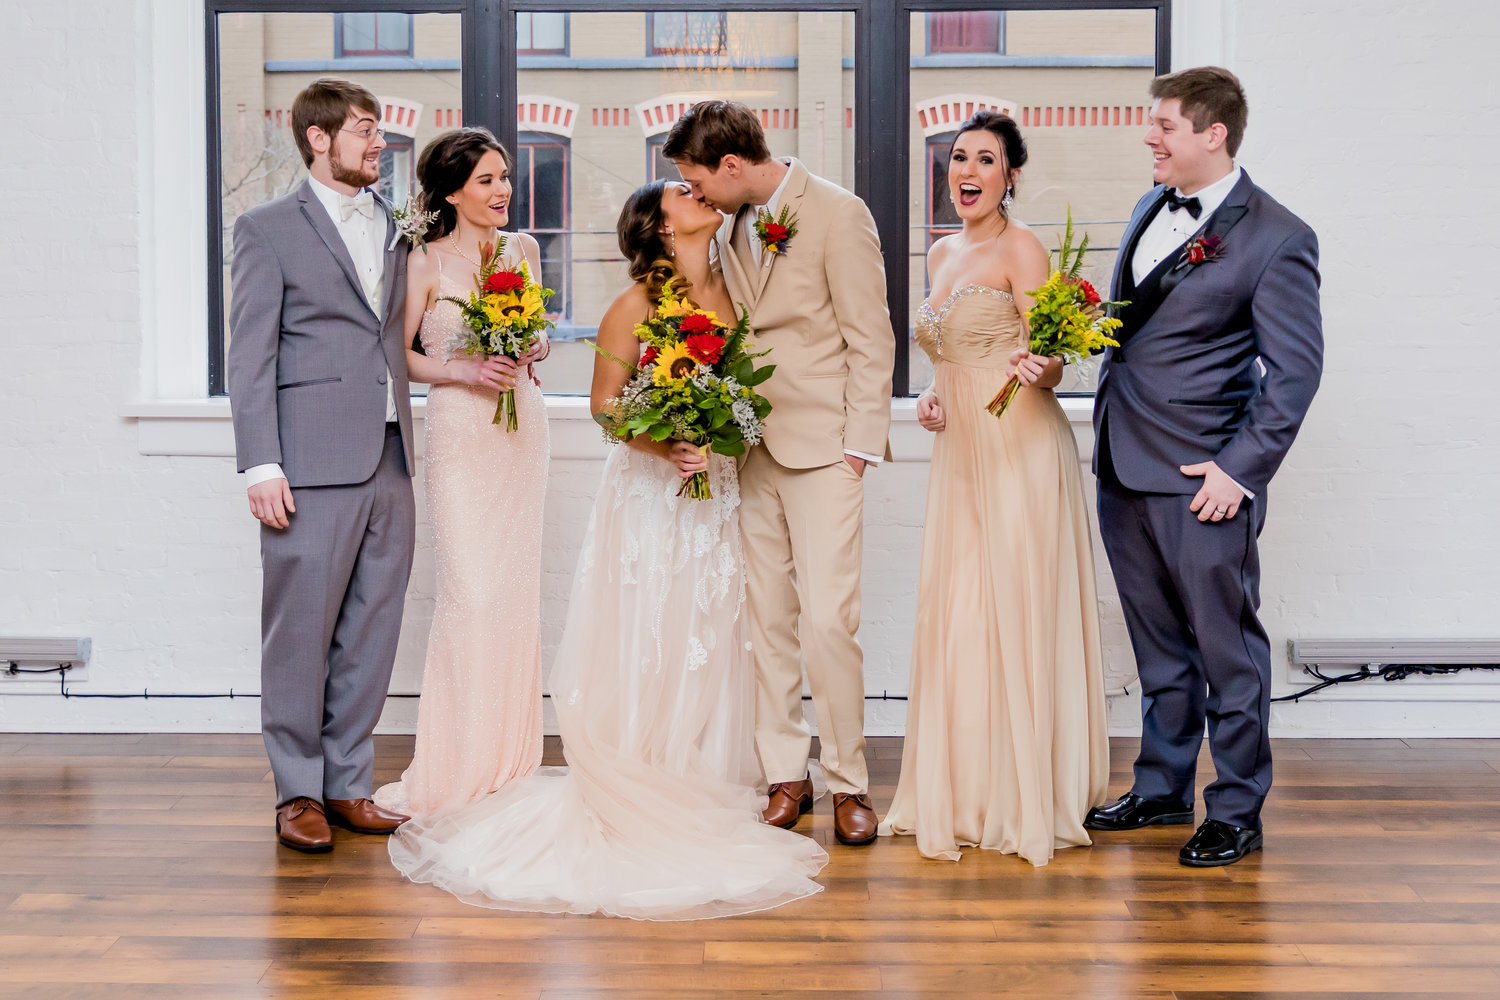 bride and groom kissing in the middle of two bridesmaids in tan dresses and two groomsmen in gray suits.